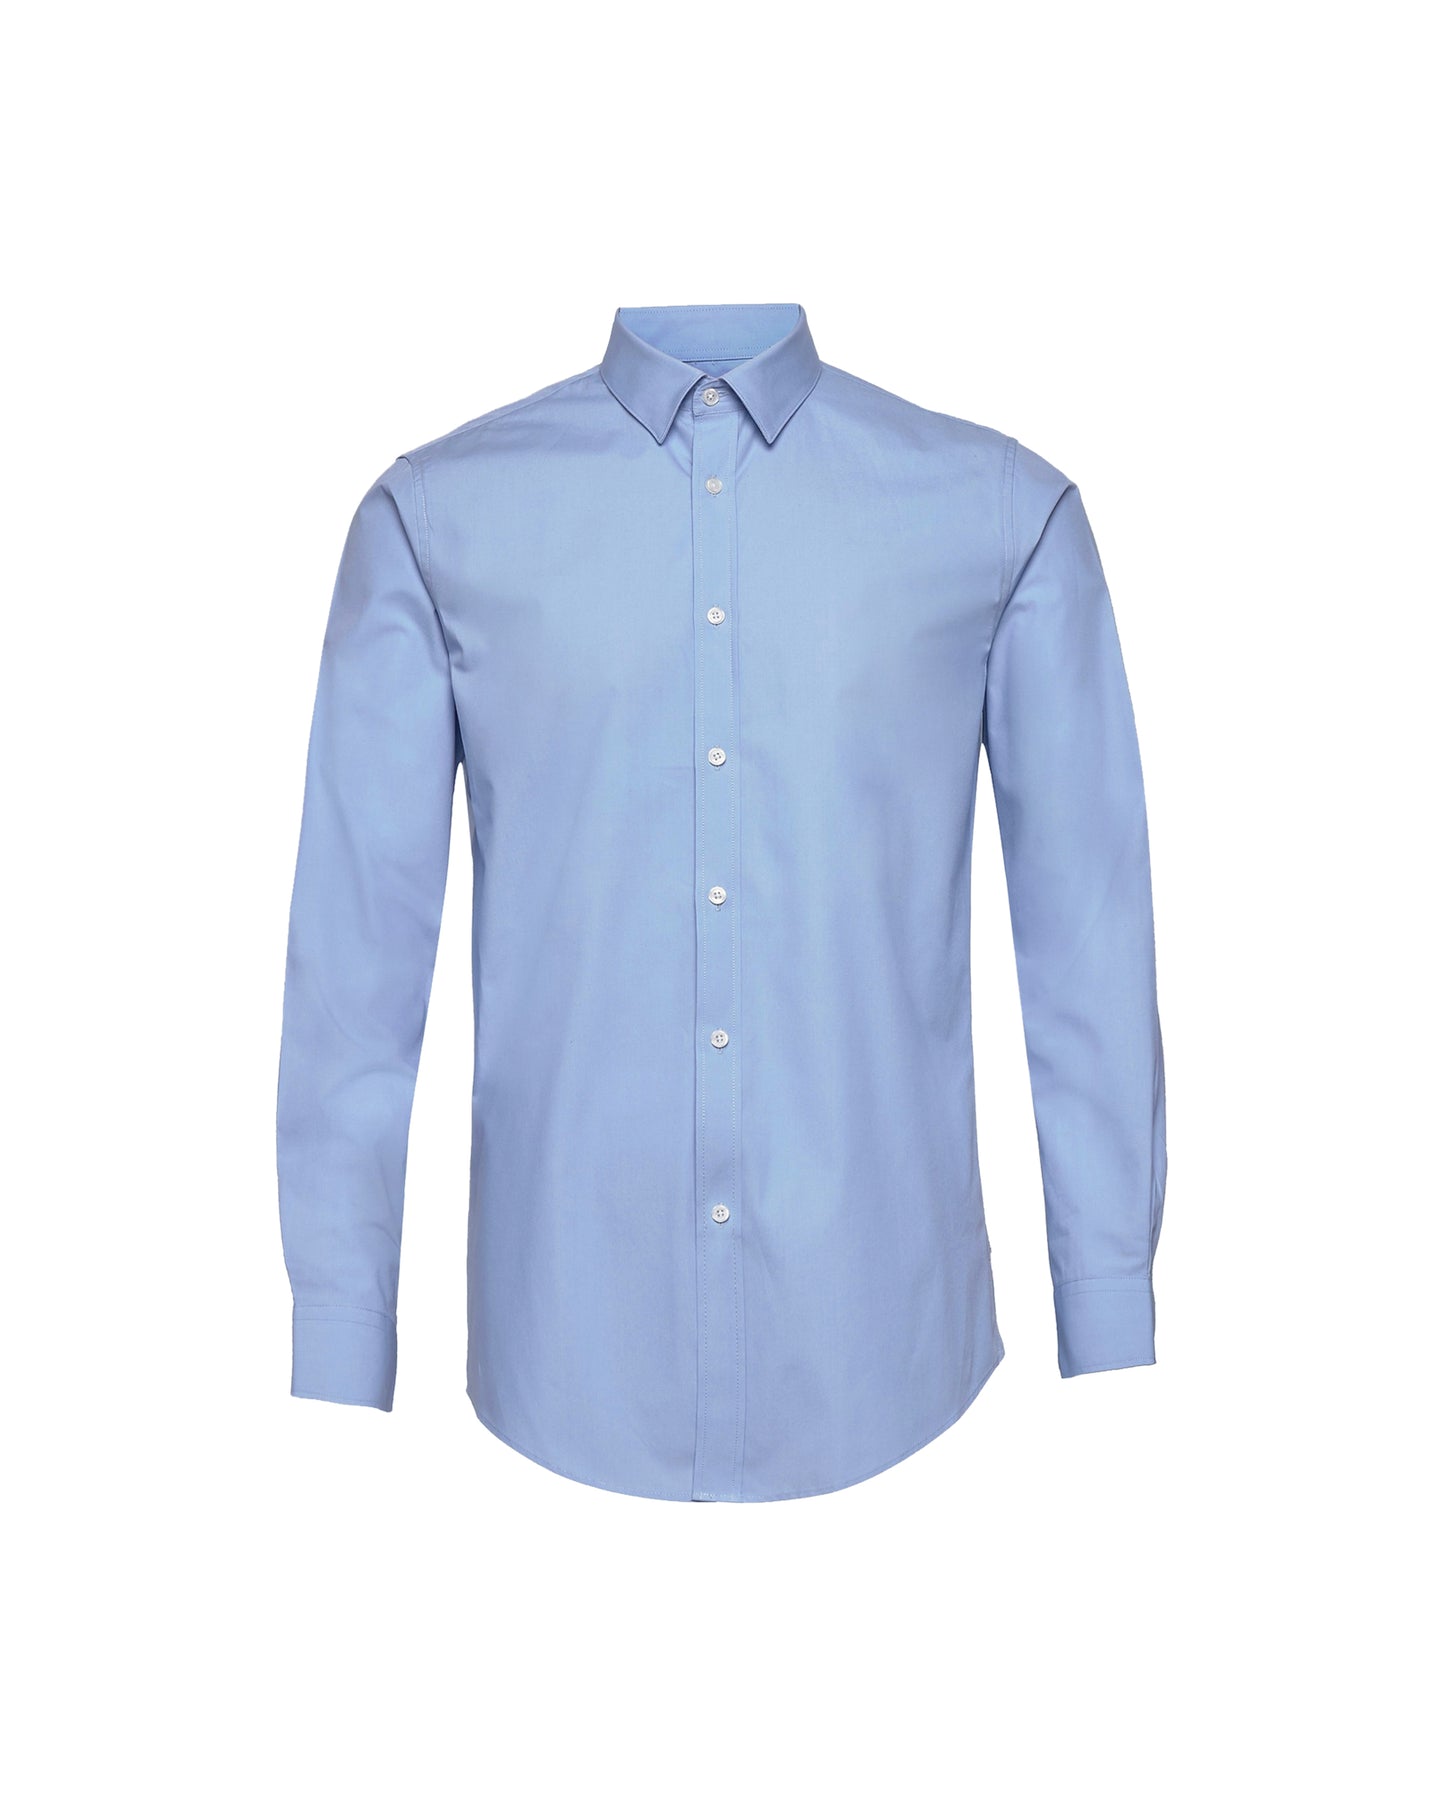 French Blue Twill Natural Stretch Cotton Dress Shirt